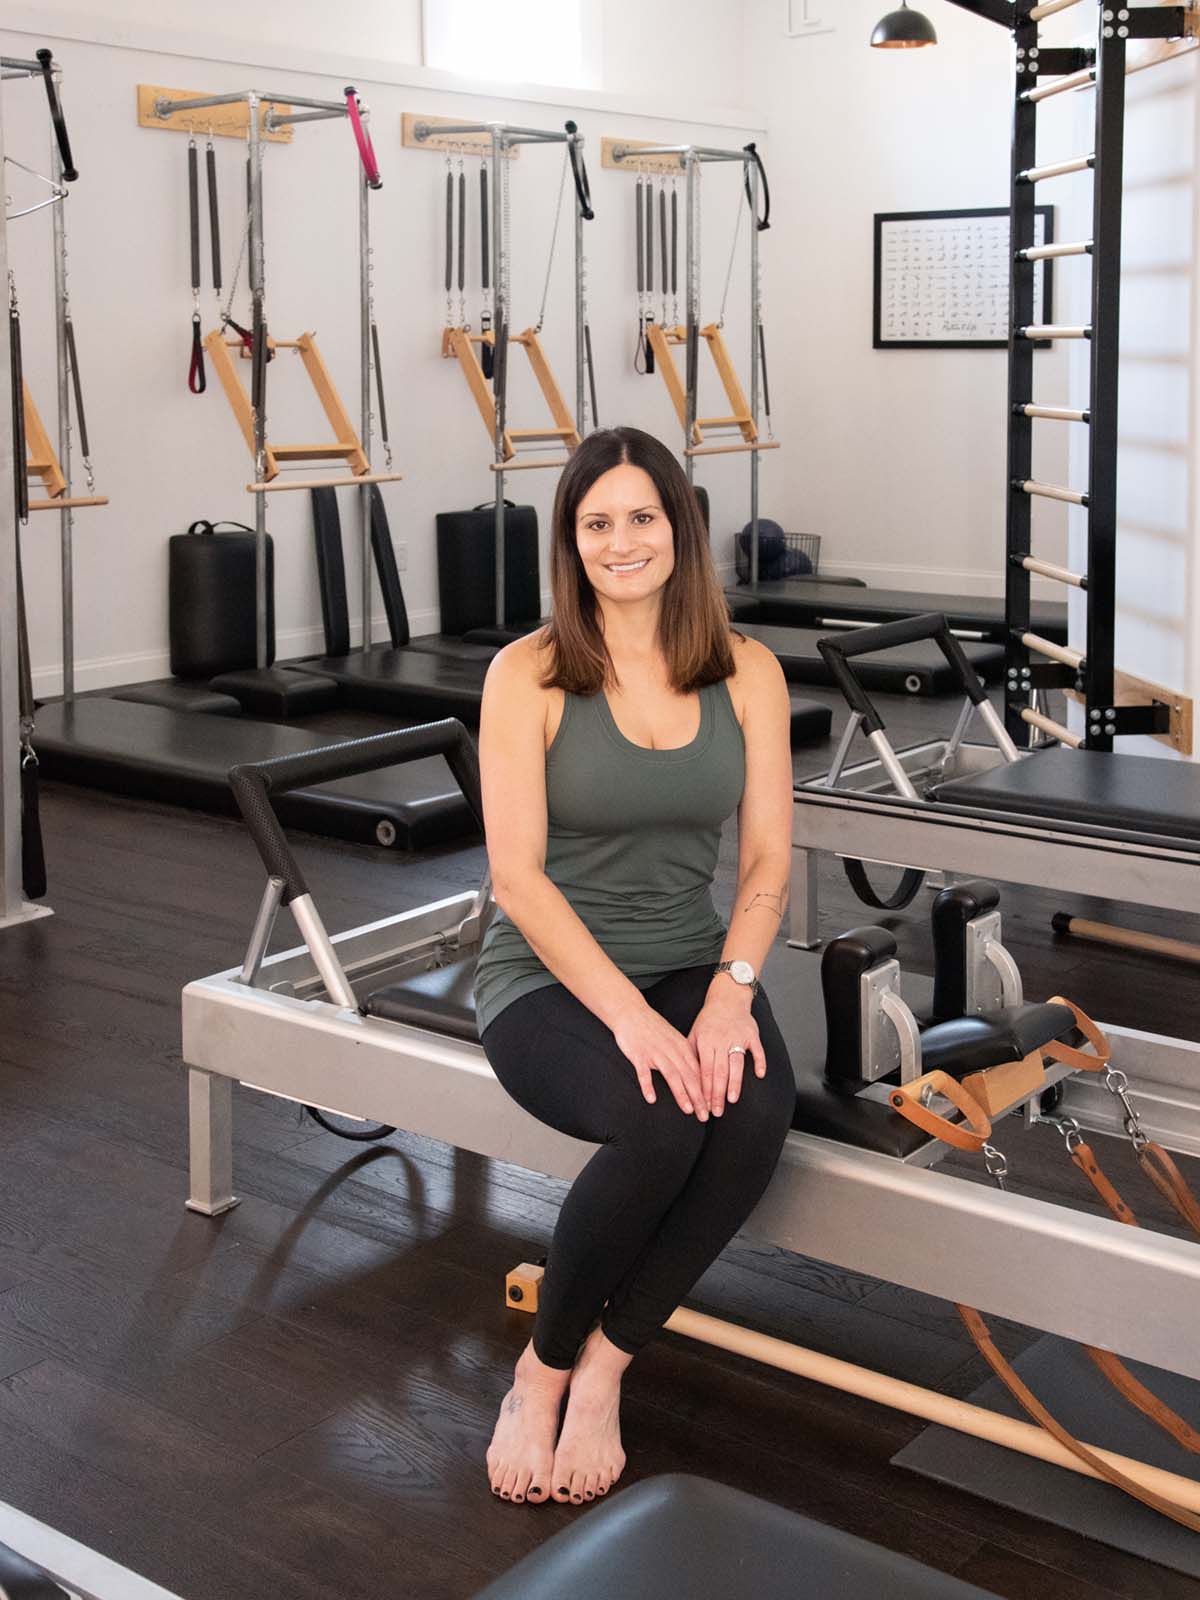 Erica Walters, Owner and Pilates Instructor at Pilates Fit Studio in Louisville KY